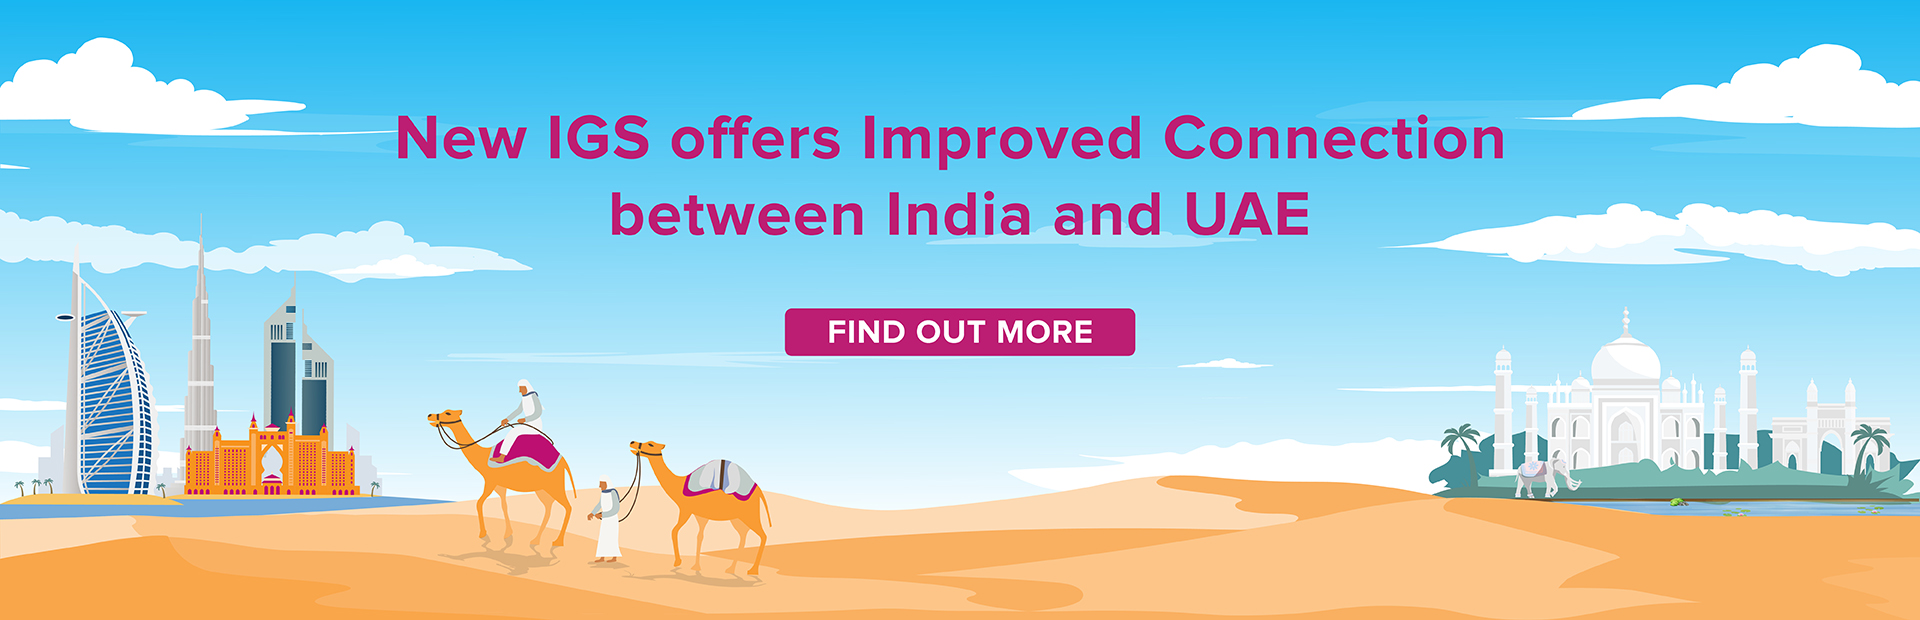 New IGS offers Improved Conenction between India and UAE